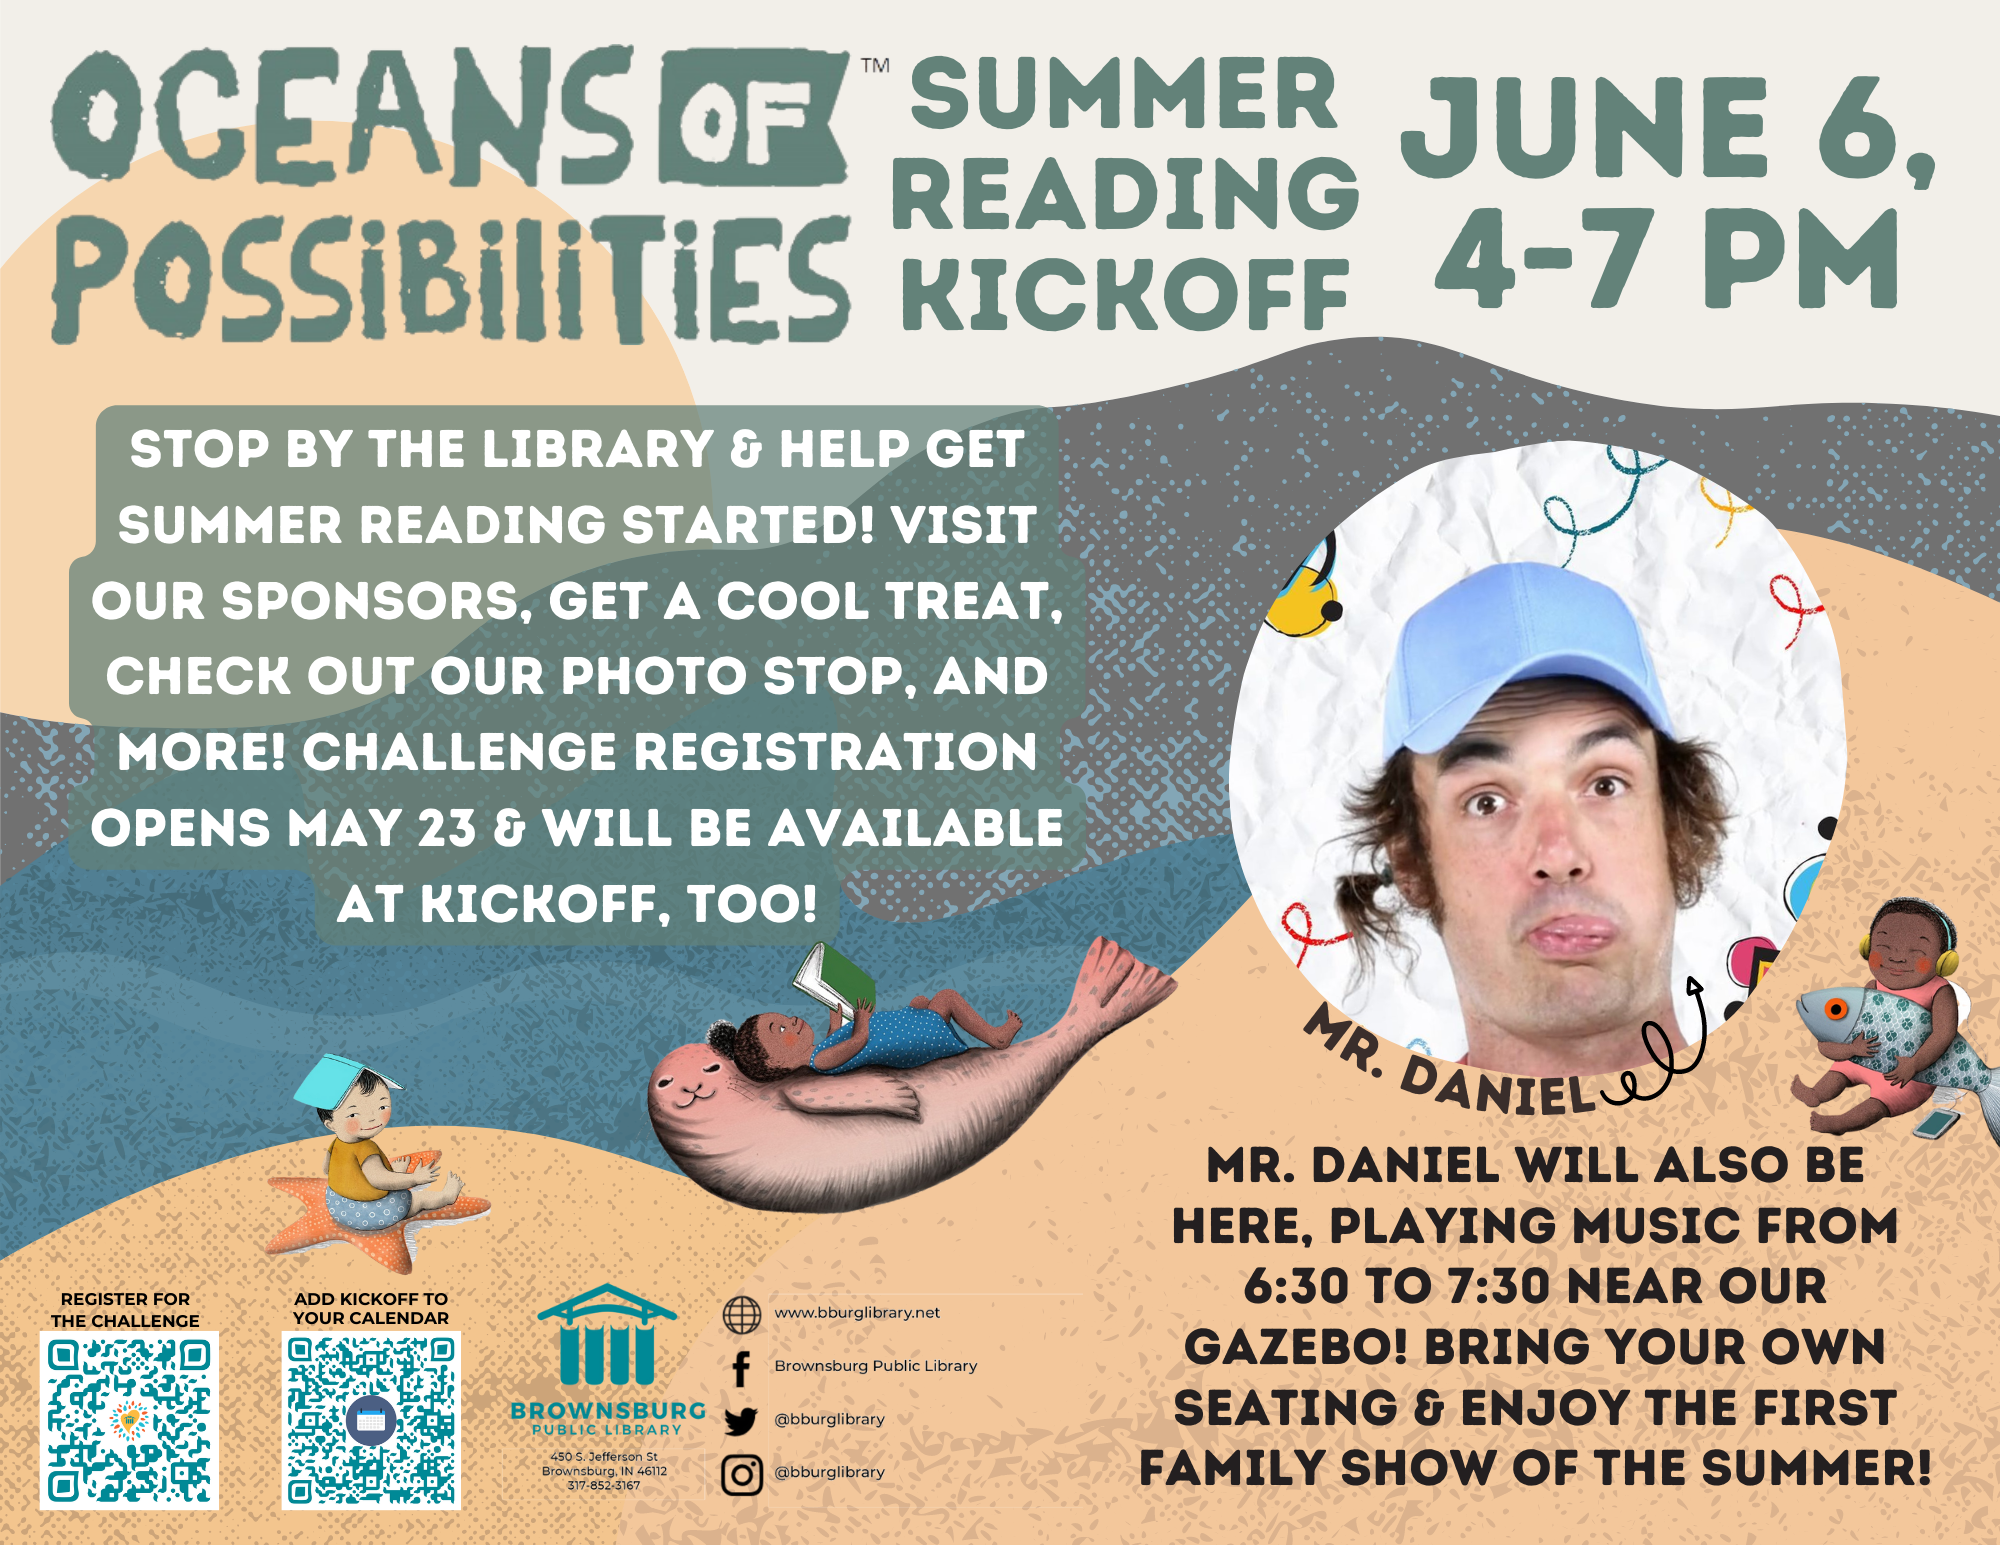 The Kickoff flyer shows a beach scene with sand, waves, and rocks. It includes a child lying on a seal reading, a child playing with a fish, and a child sitting in the sand with a starfish. There's also a picture of a man in a blue hat with brown hair making a silly face with his tongue out. This is Mr. Daniel. The image also includes text about summer reading kickoff.